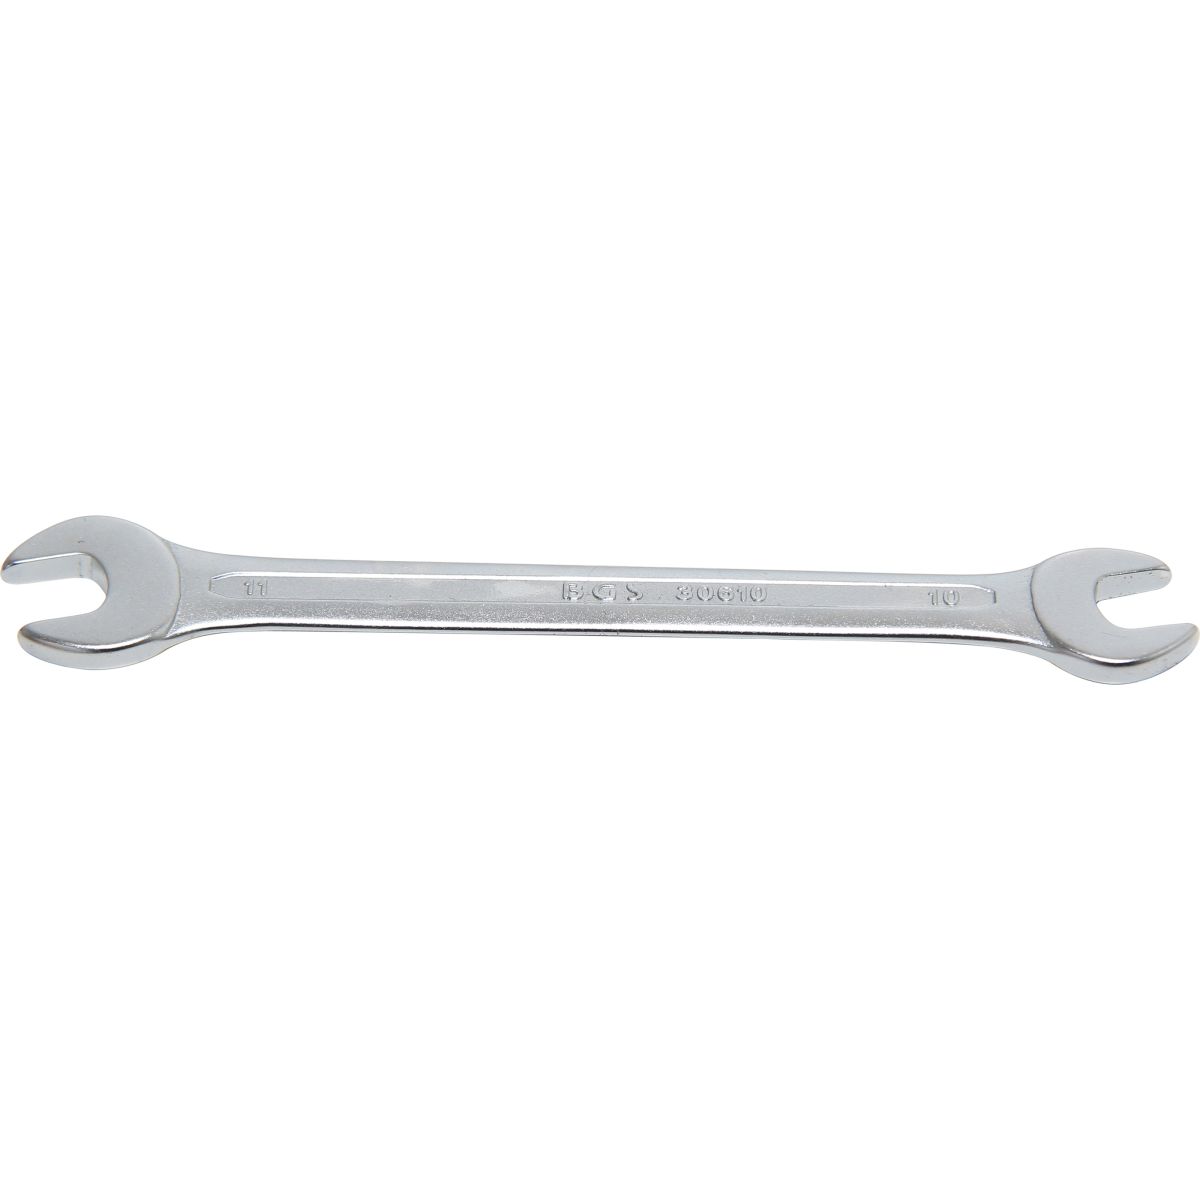 Double Open End Spanner | 10 x 11 mm